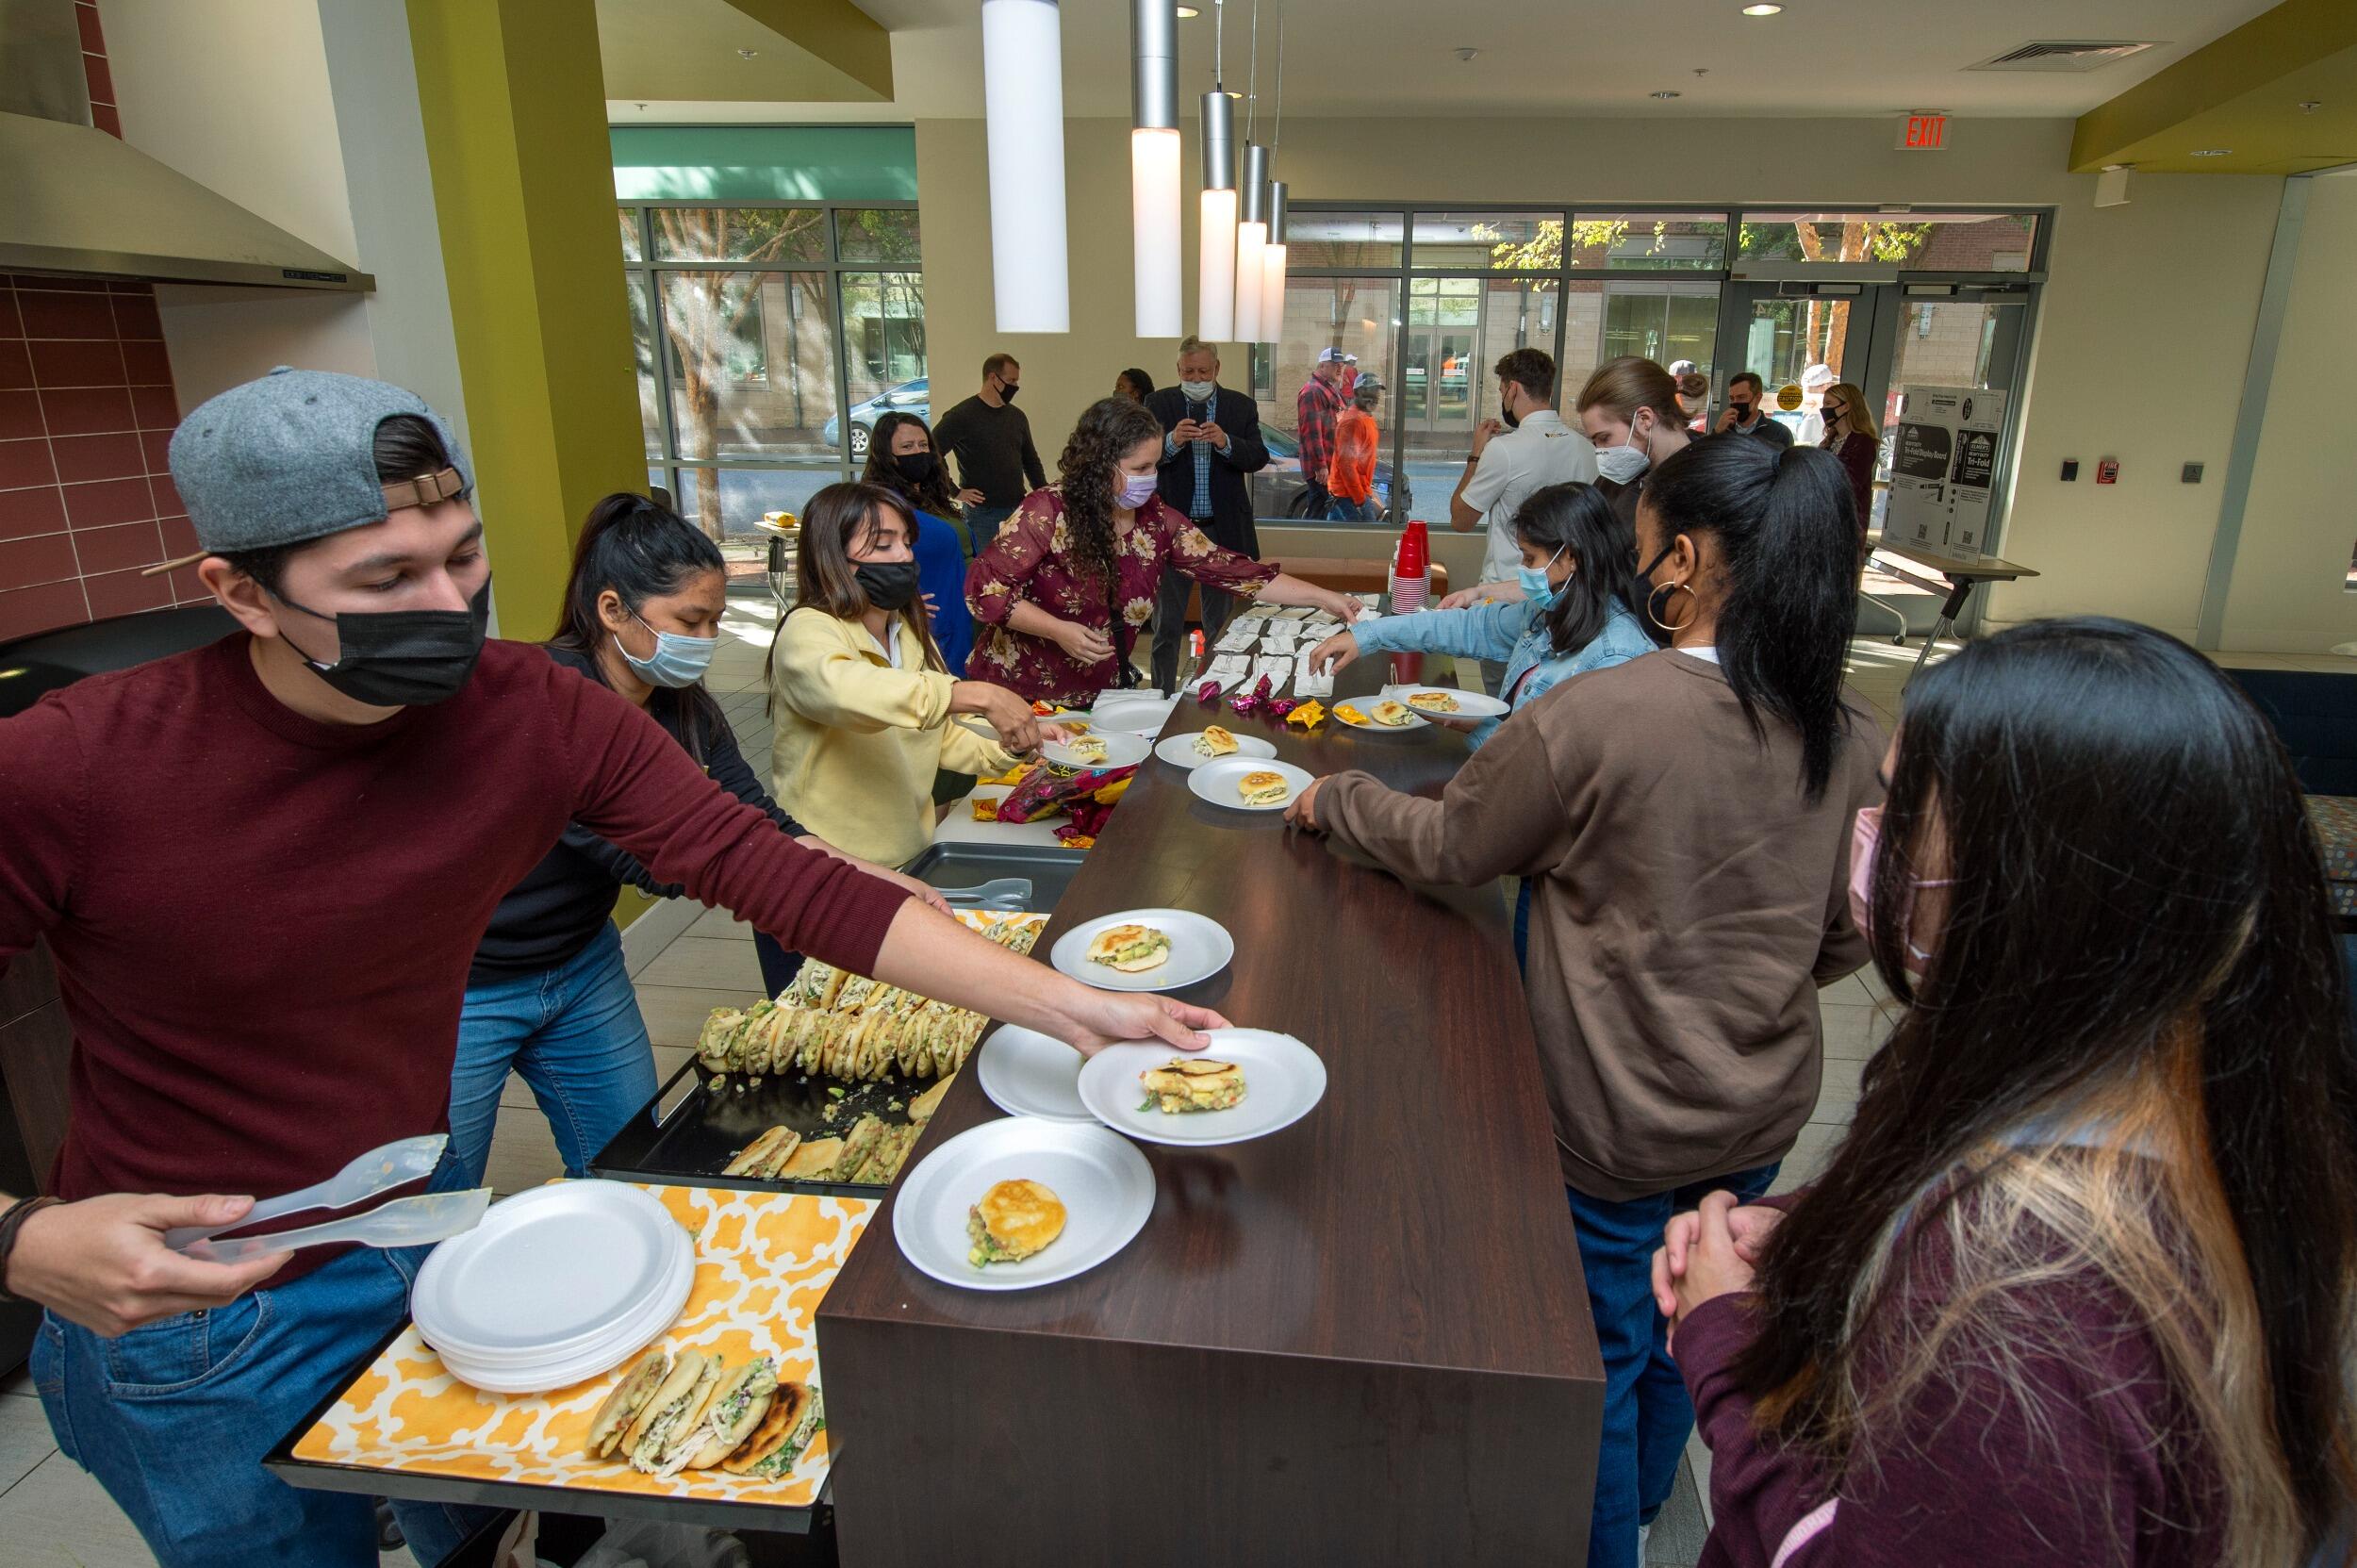 Students serving dishes of food to a line of other students.